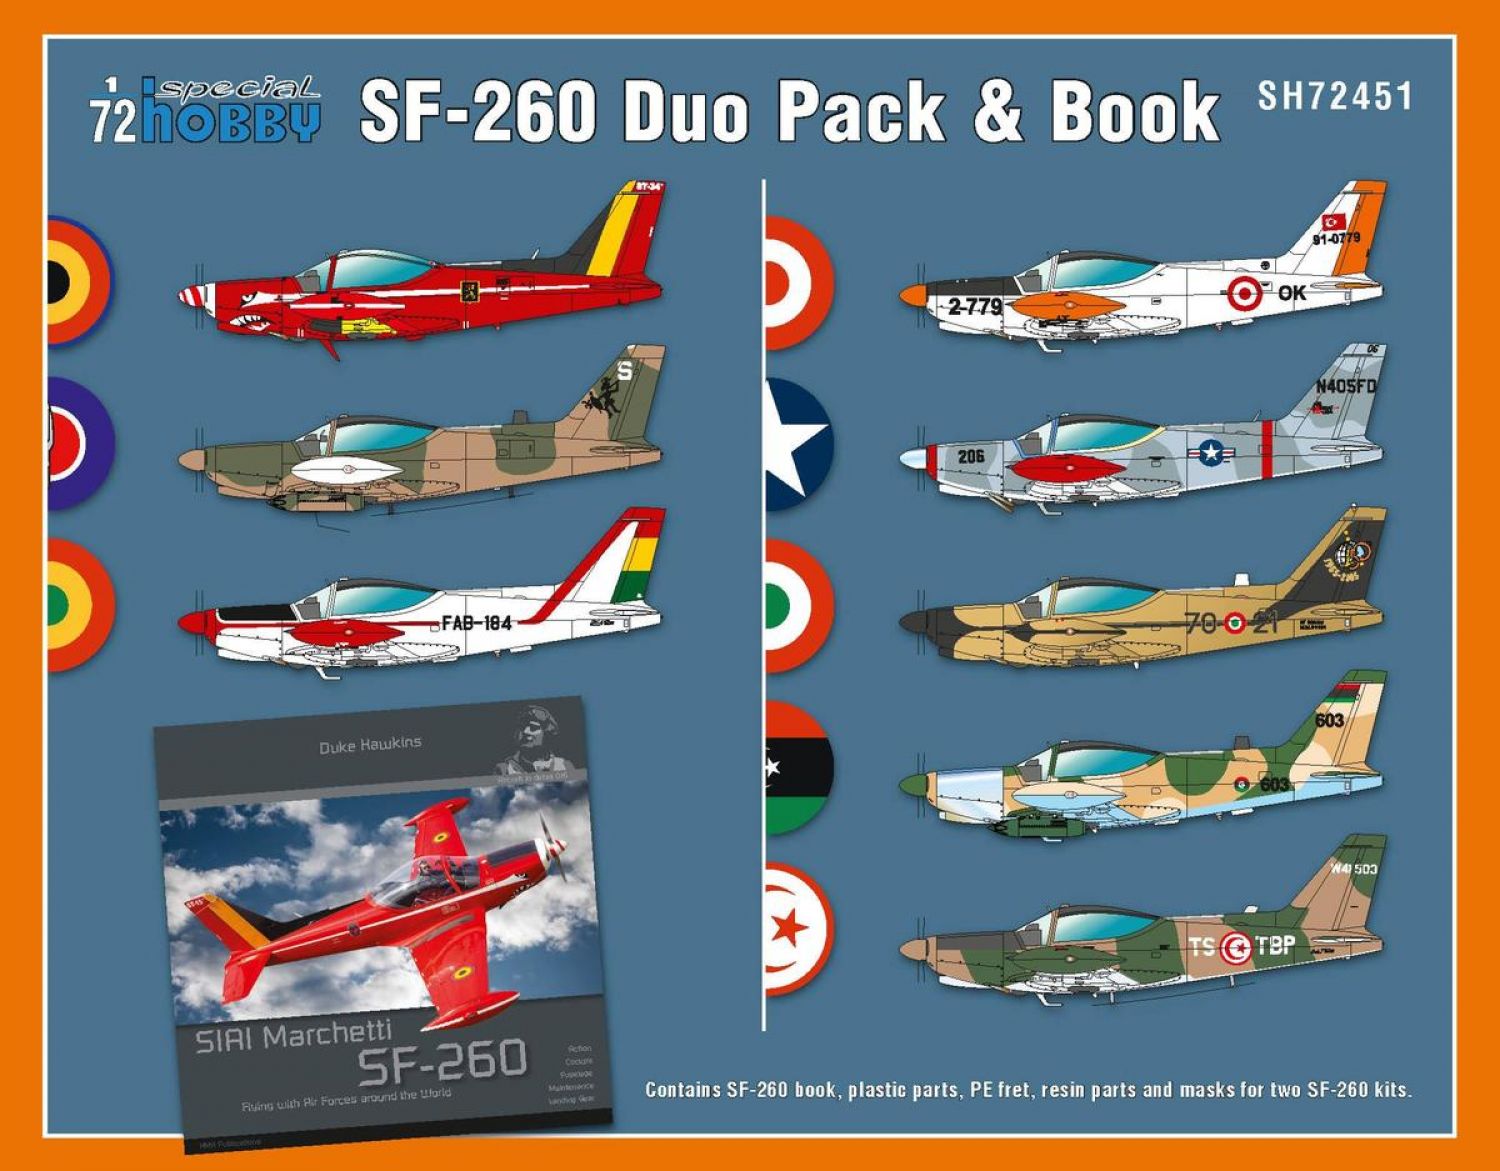 special-hobby-SH72451-1-SIAI-Marchetti-SF-260-Duo-Pack-and-book-limited-edition